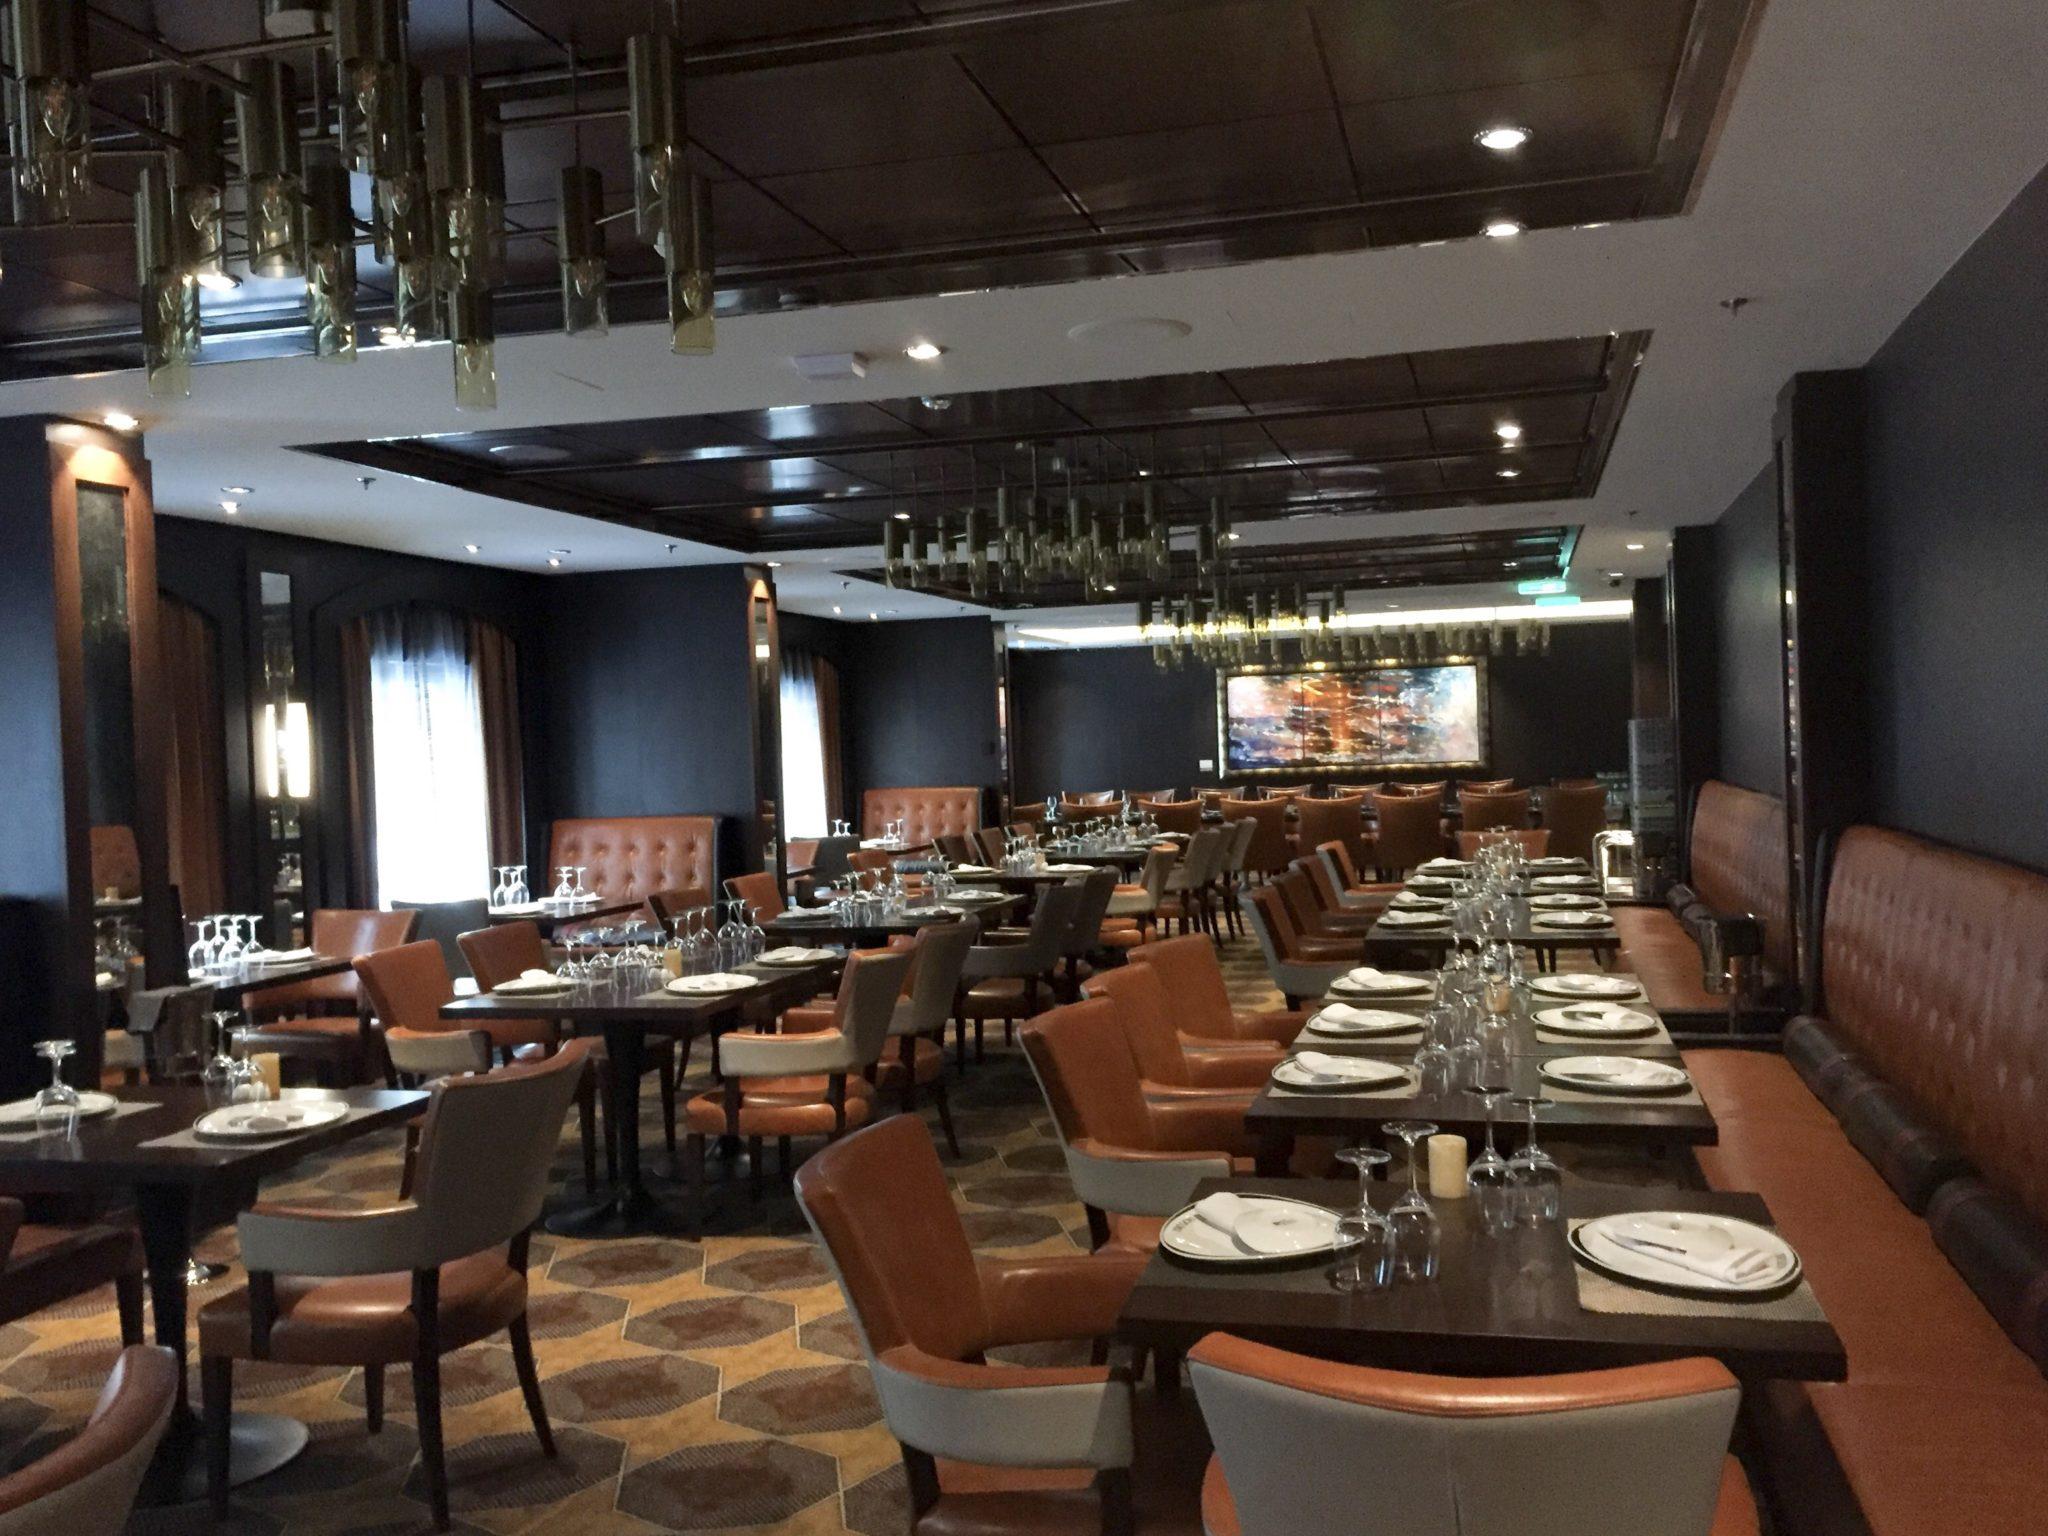 Interior of Chops Grille speciality restaurant on Ovation of the Seas